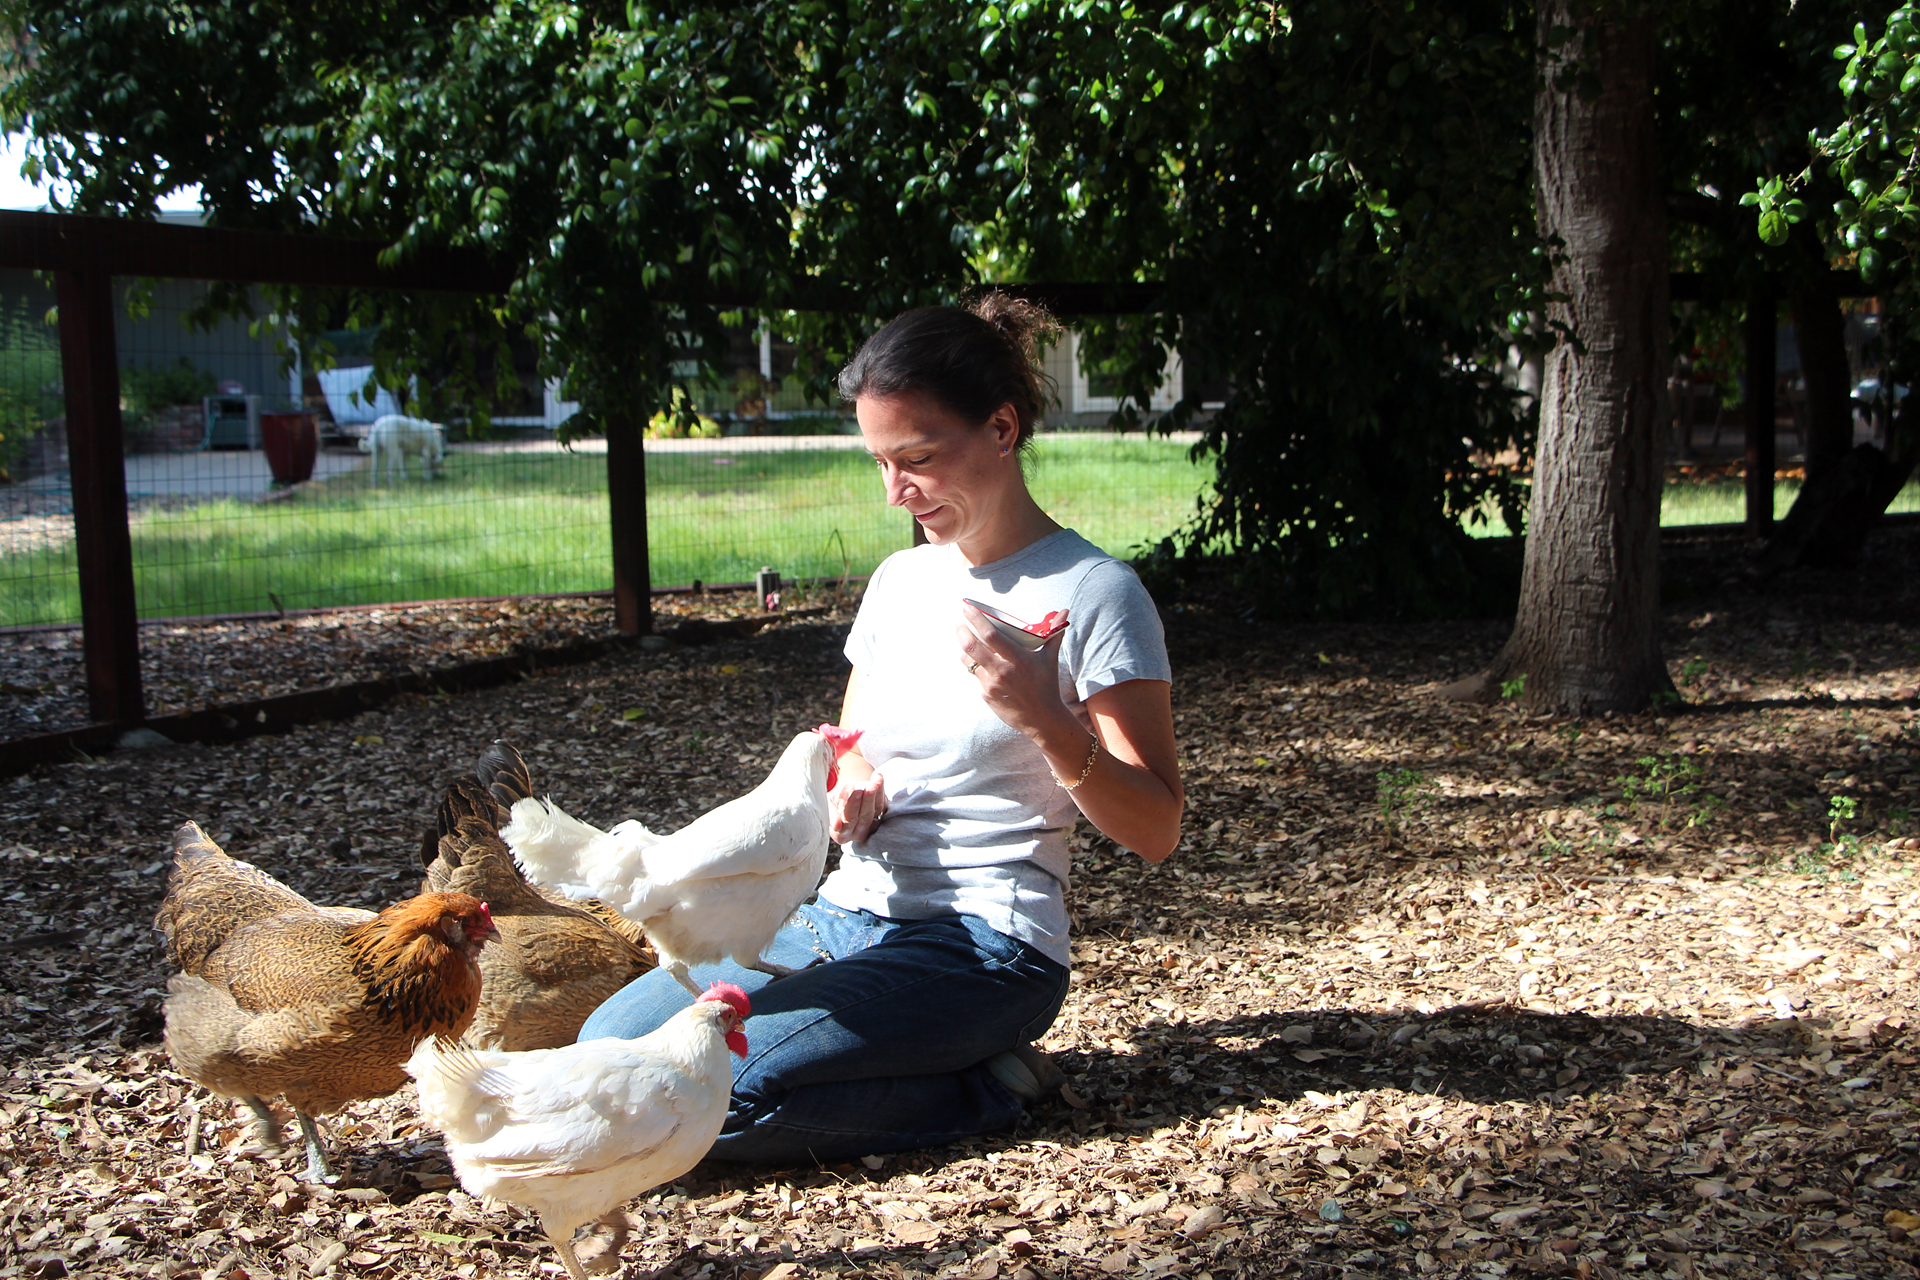 Isabelle Cnudde says taking care of chickens is much less maintenance than her cats or dog.